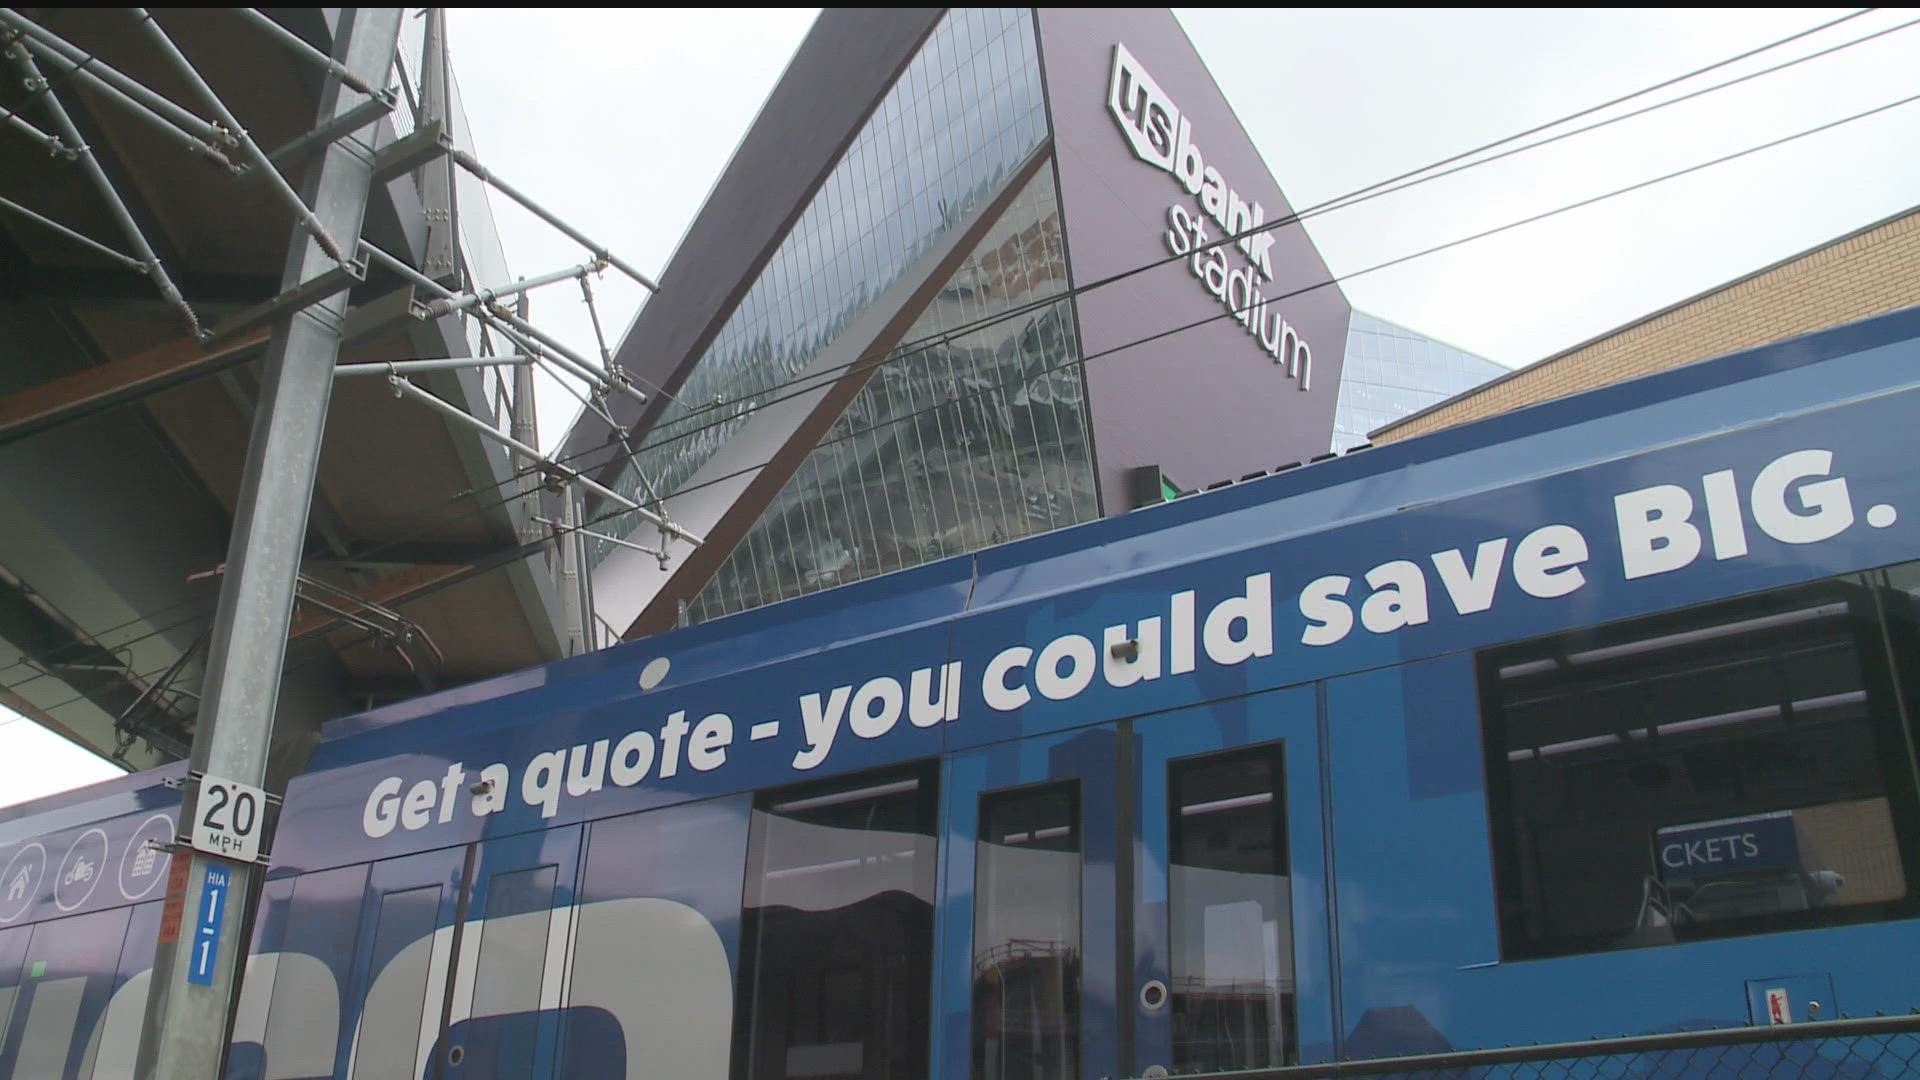 As people come into the Twin Cities for weekend events, Metro Transit wants more people to take the train.